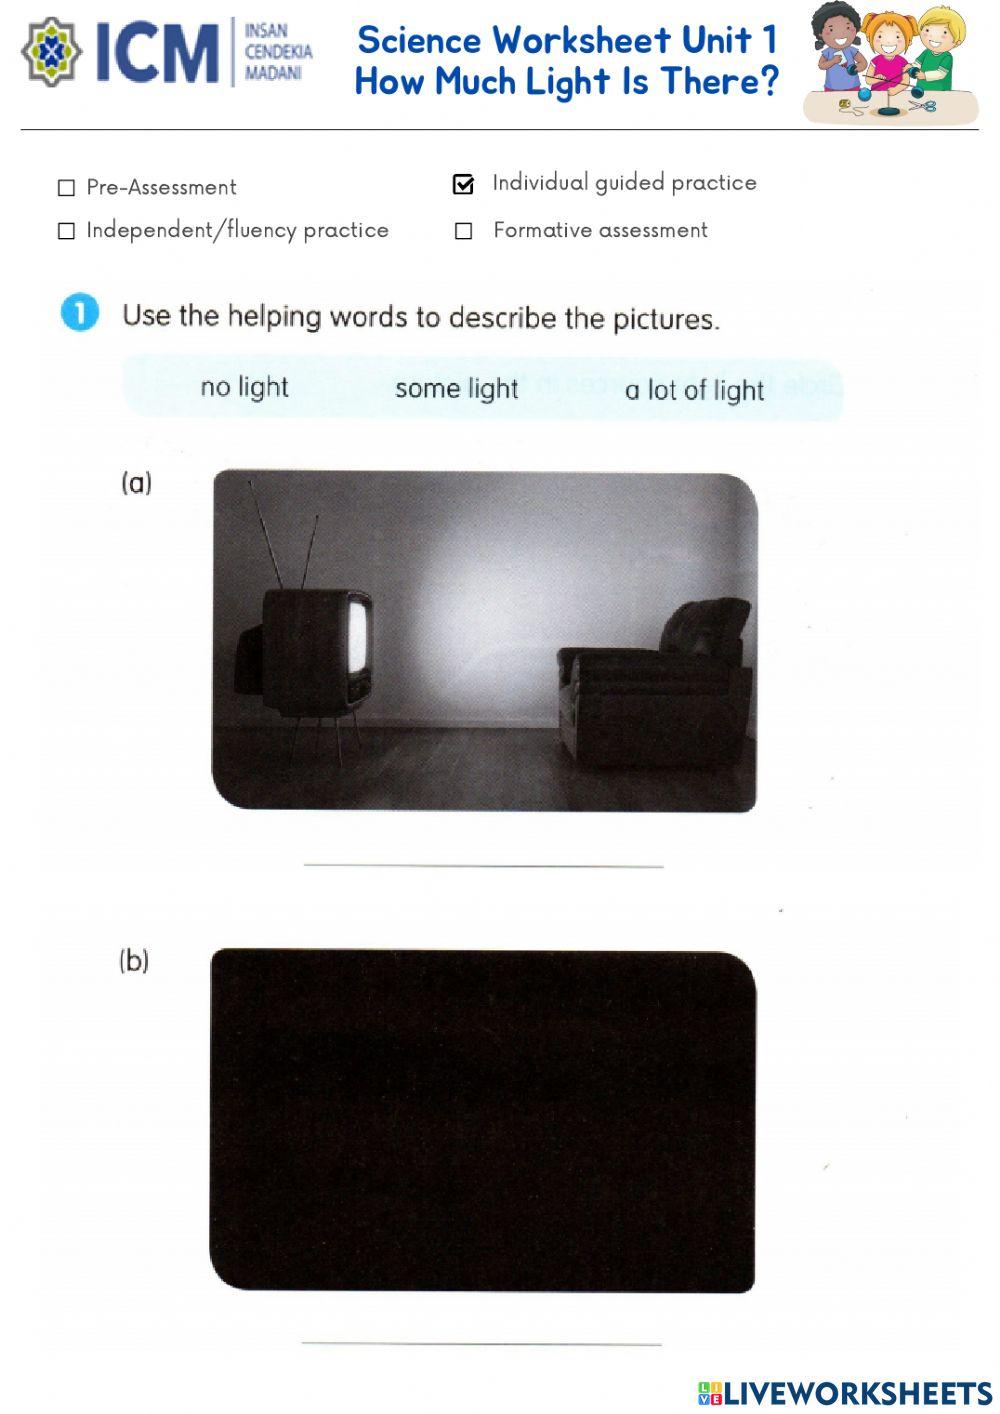 How Much Light Is There?